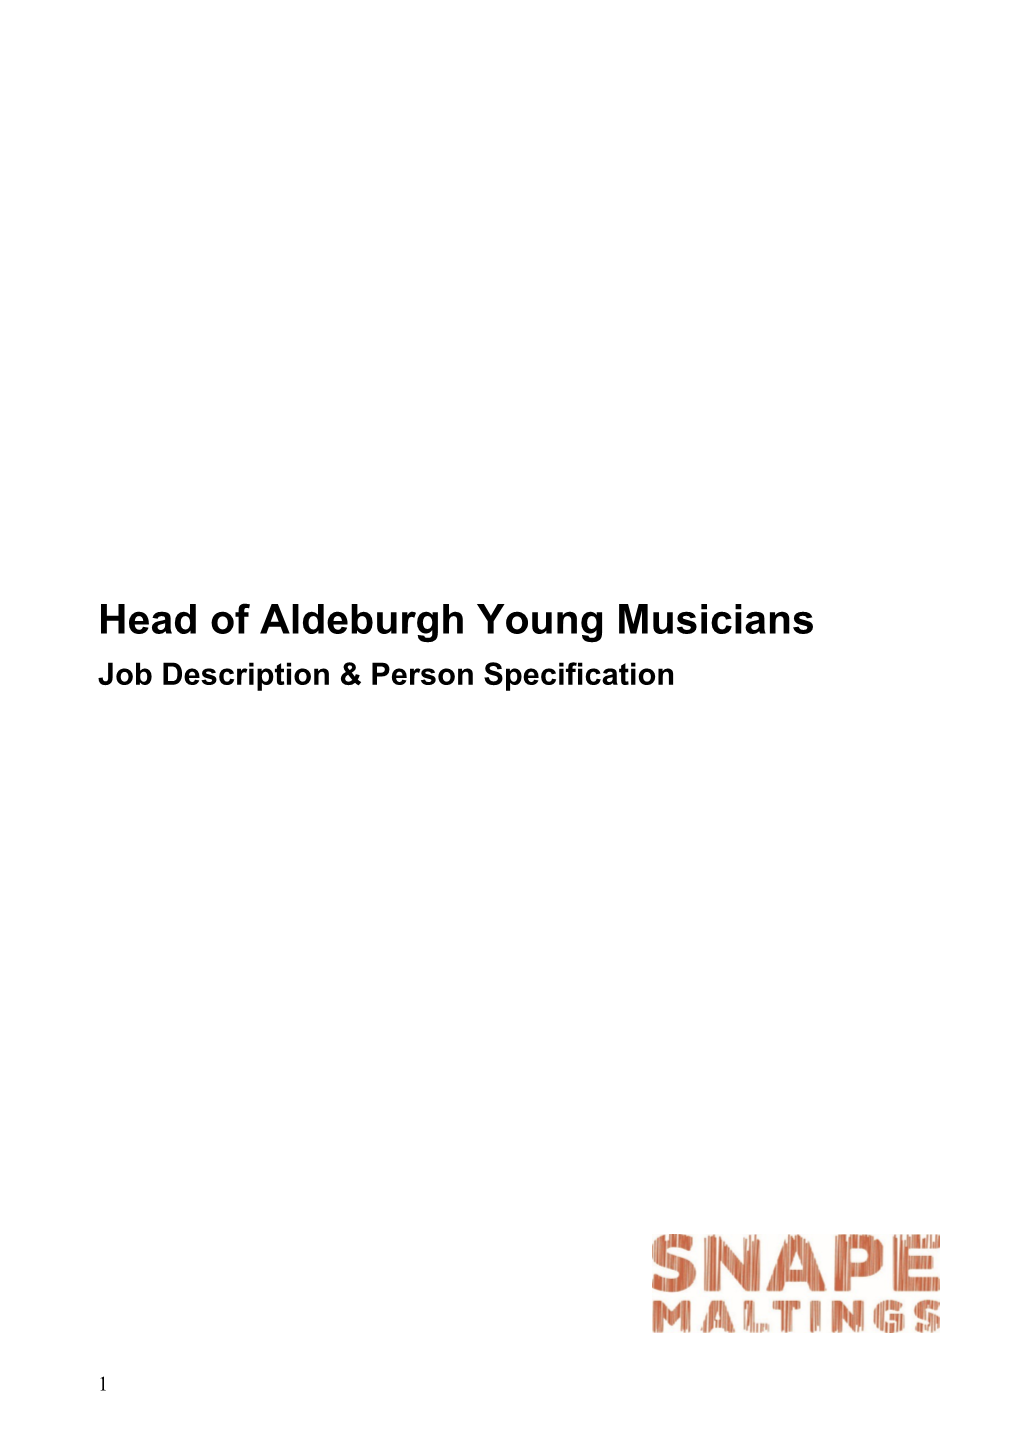 Head of Aldeburgh Young Musicians